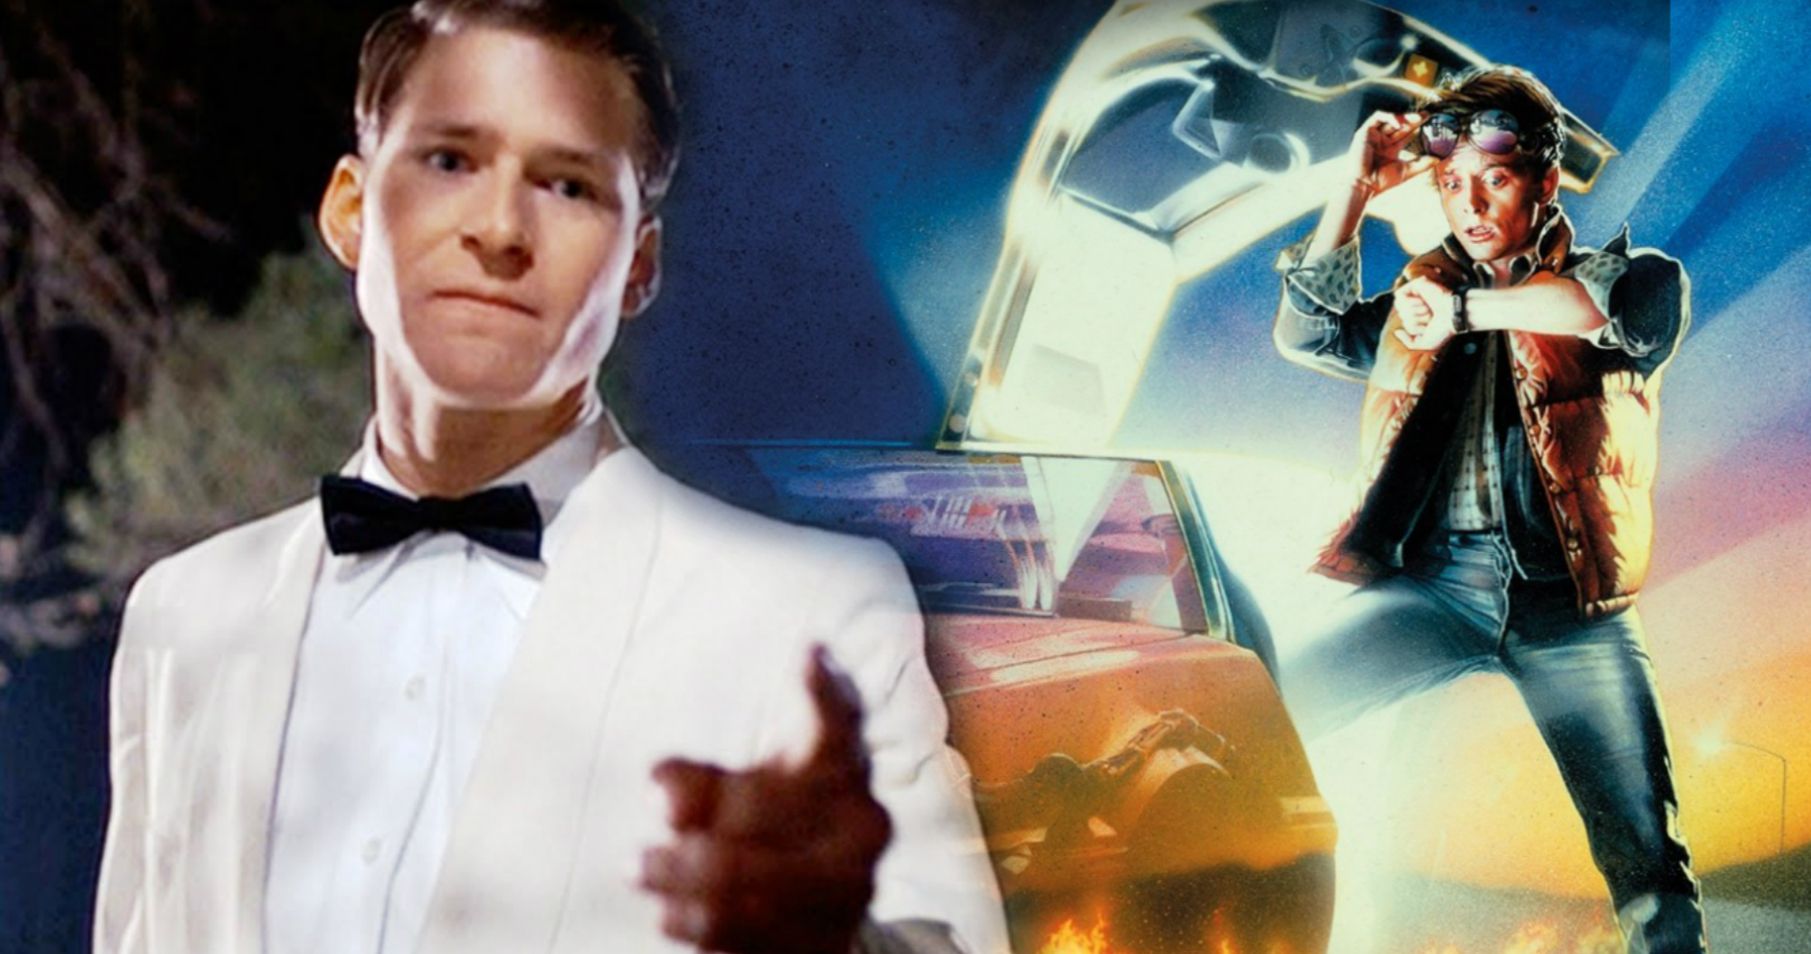 Crispin Glover Explains Why He'll Never Attend a Back to the Future Reunion